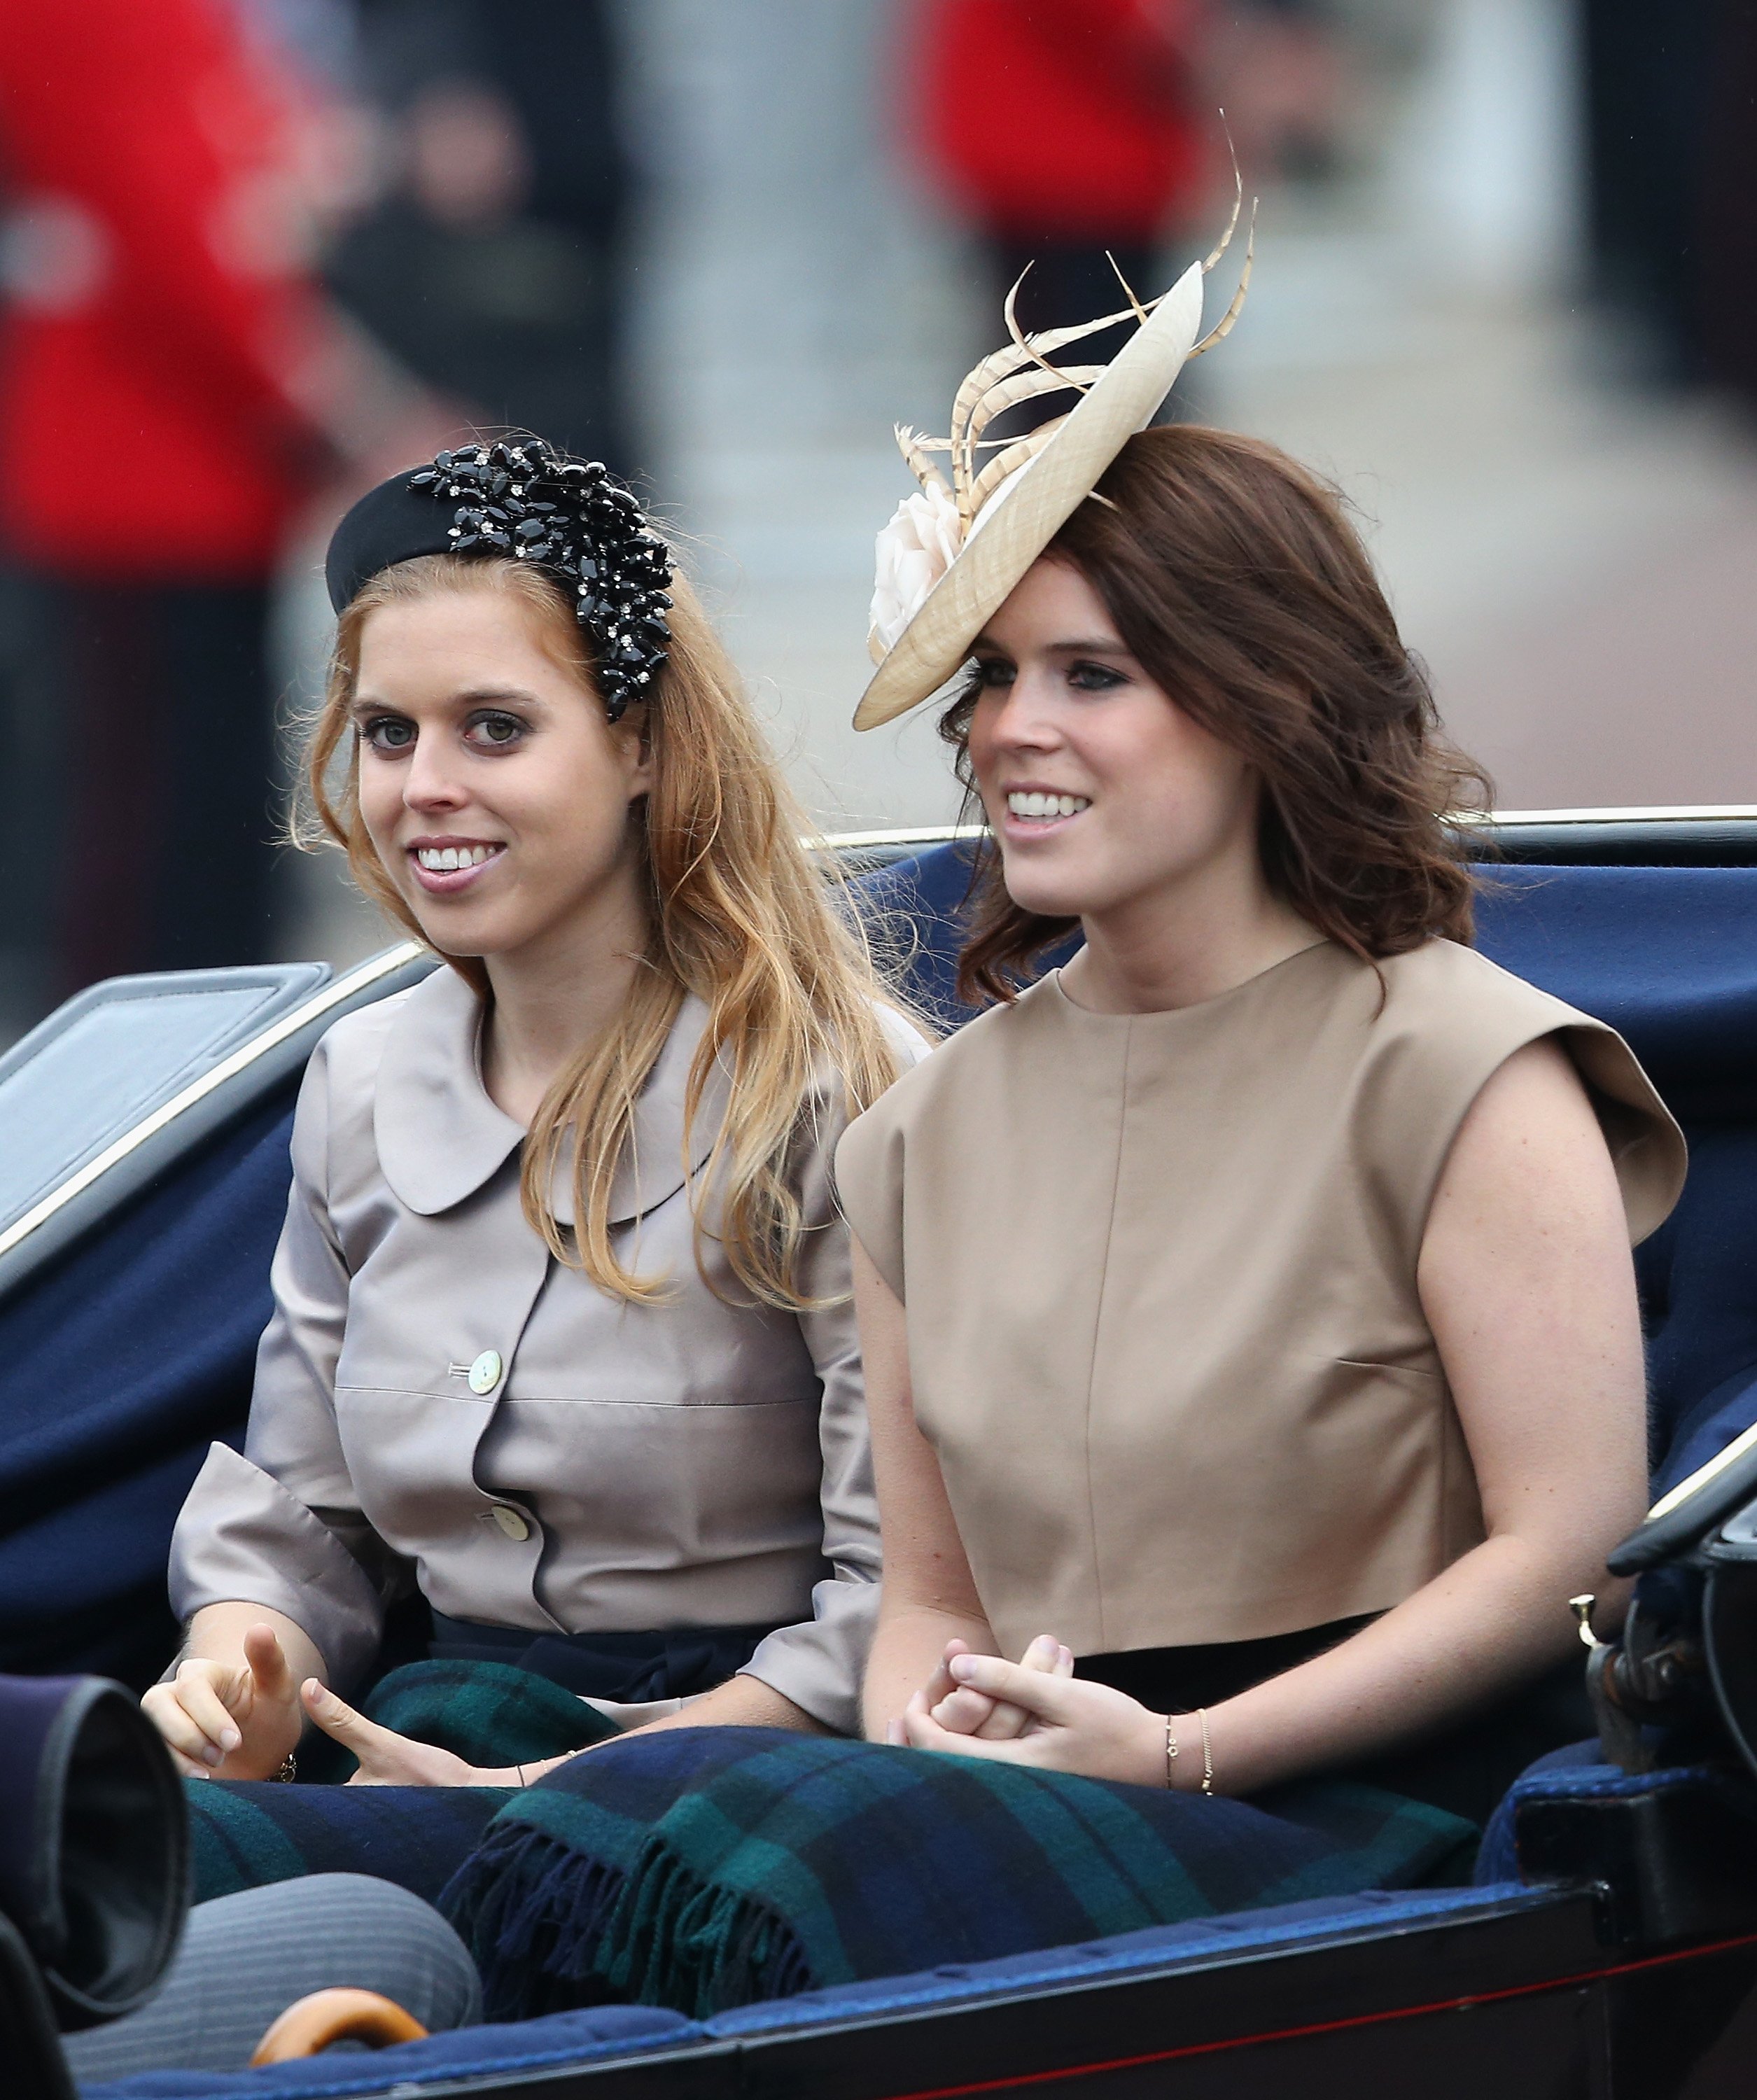 Princess Beatrice and Princess Eugenie during the Trooping the Colour on June 13, 2015, in London, England | Source: Getty Images